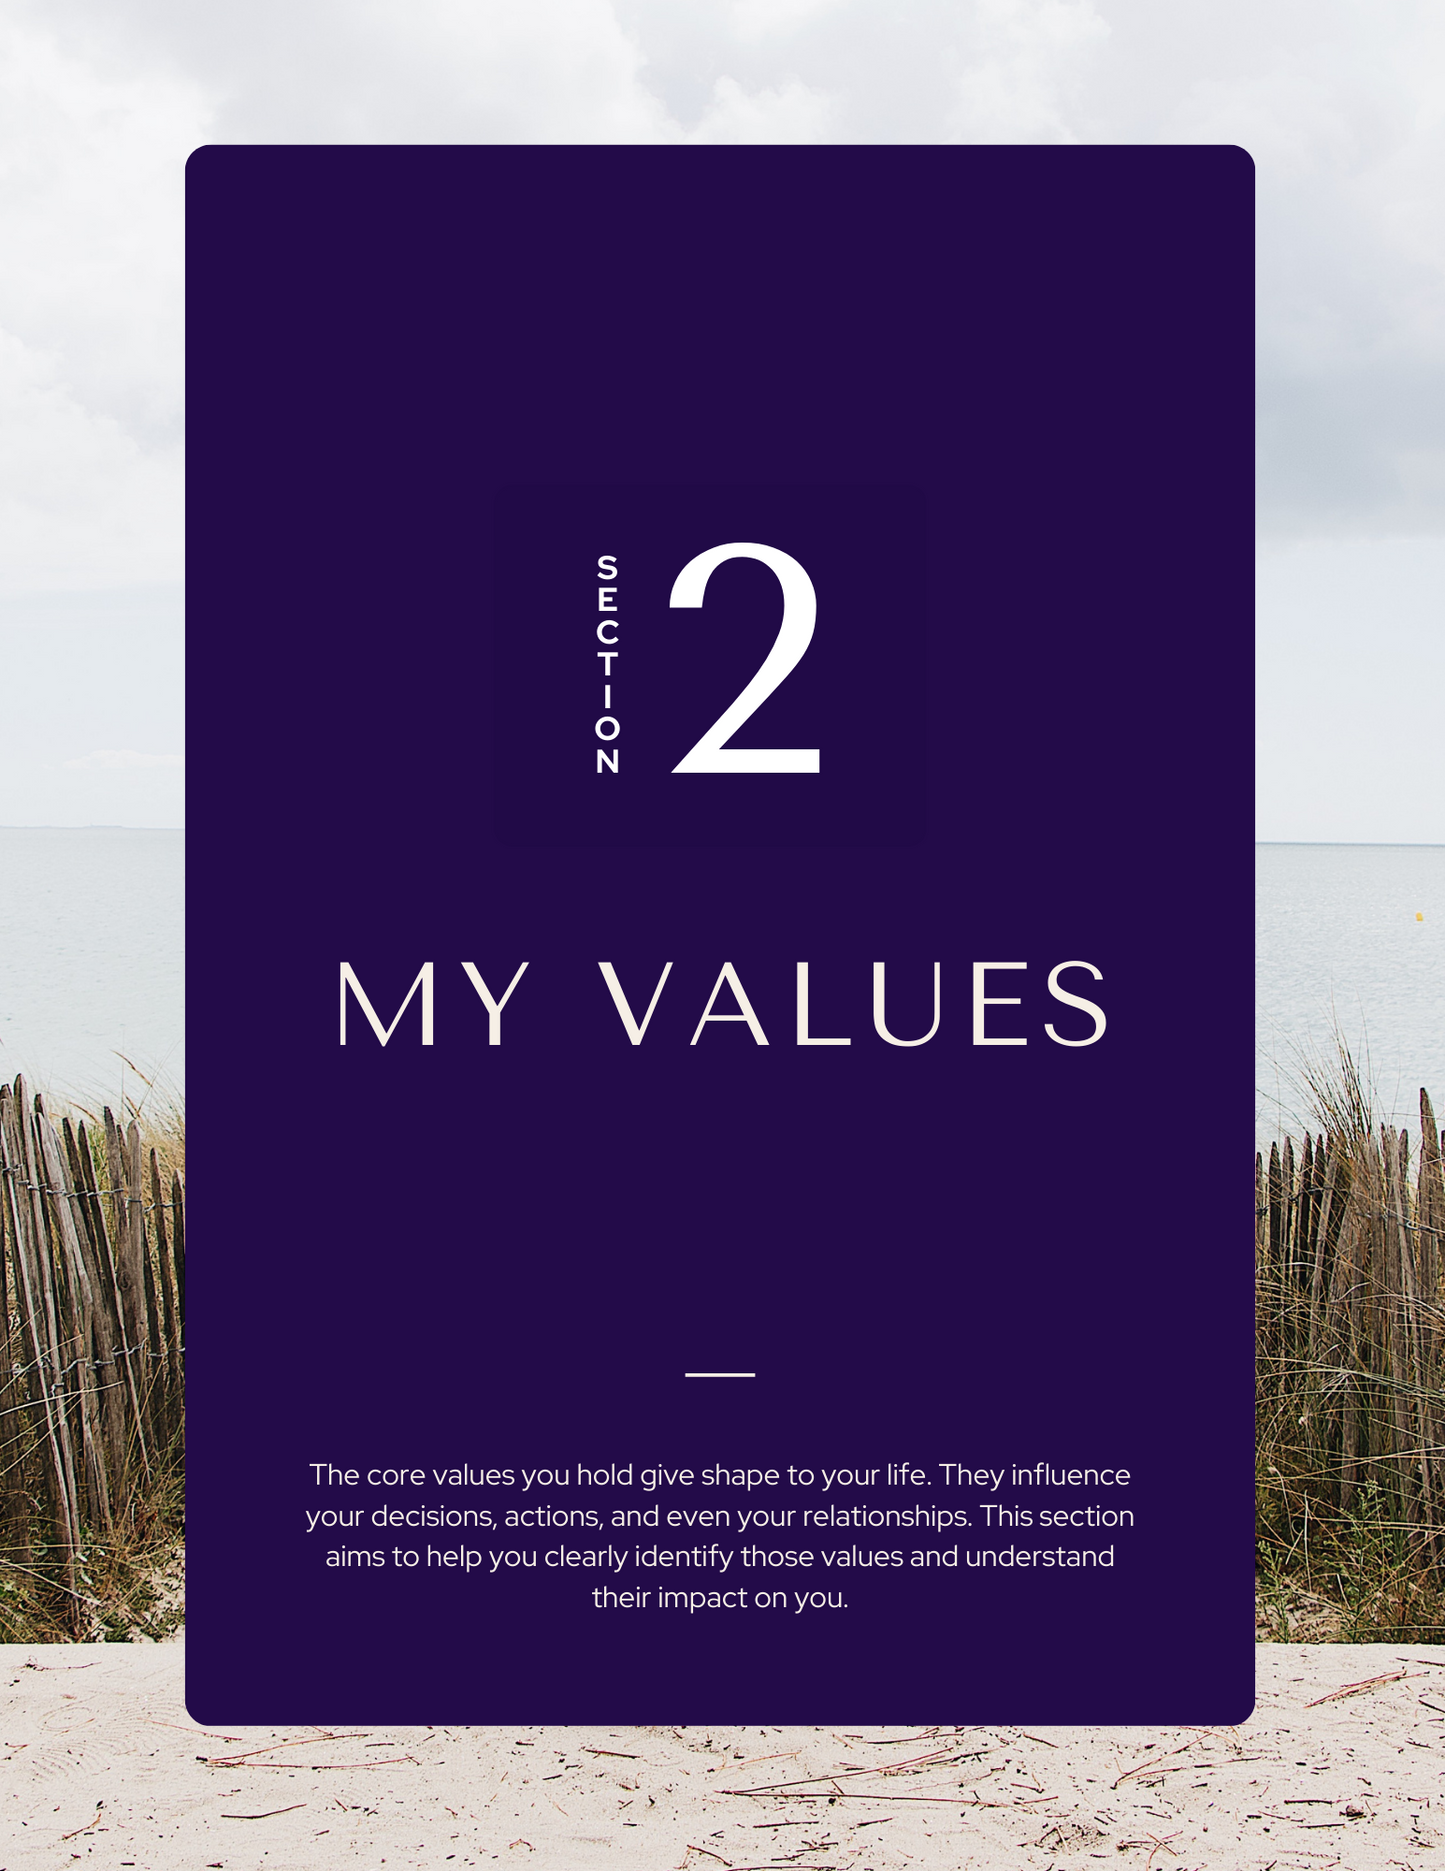 Who Am I Journal with 30 Affirmations